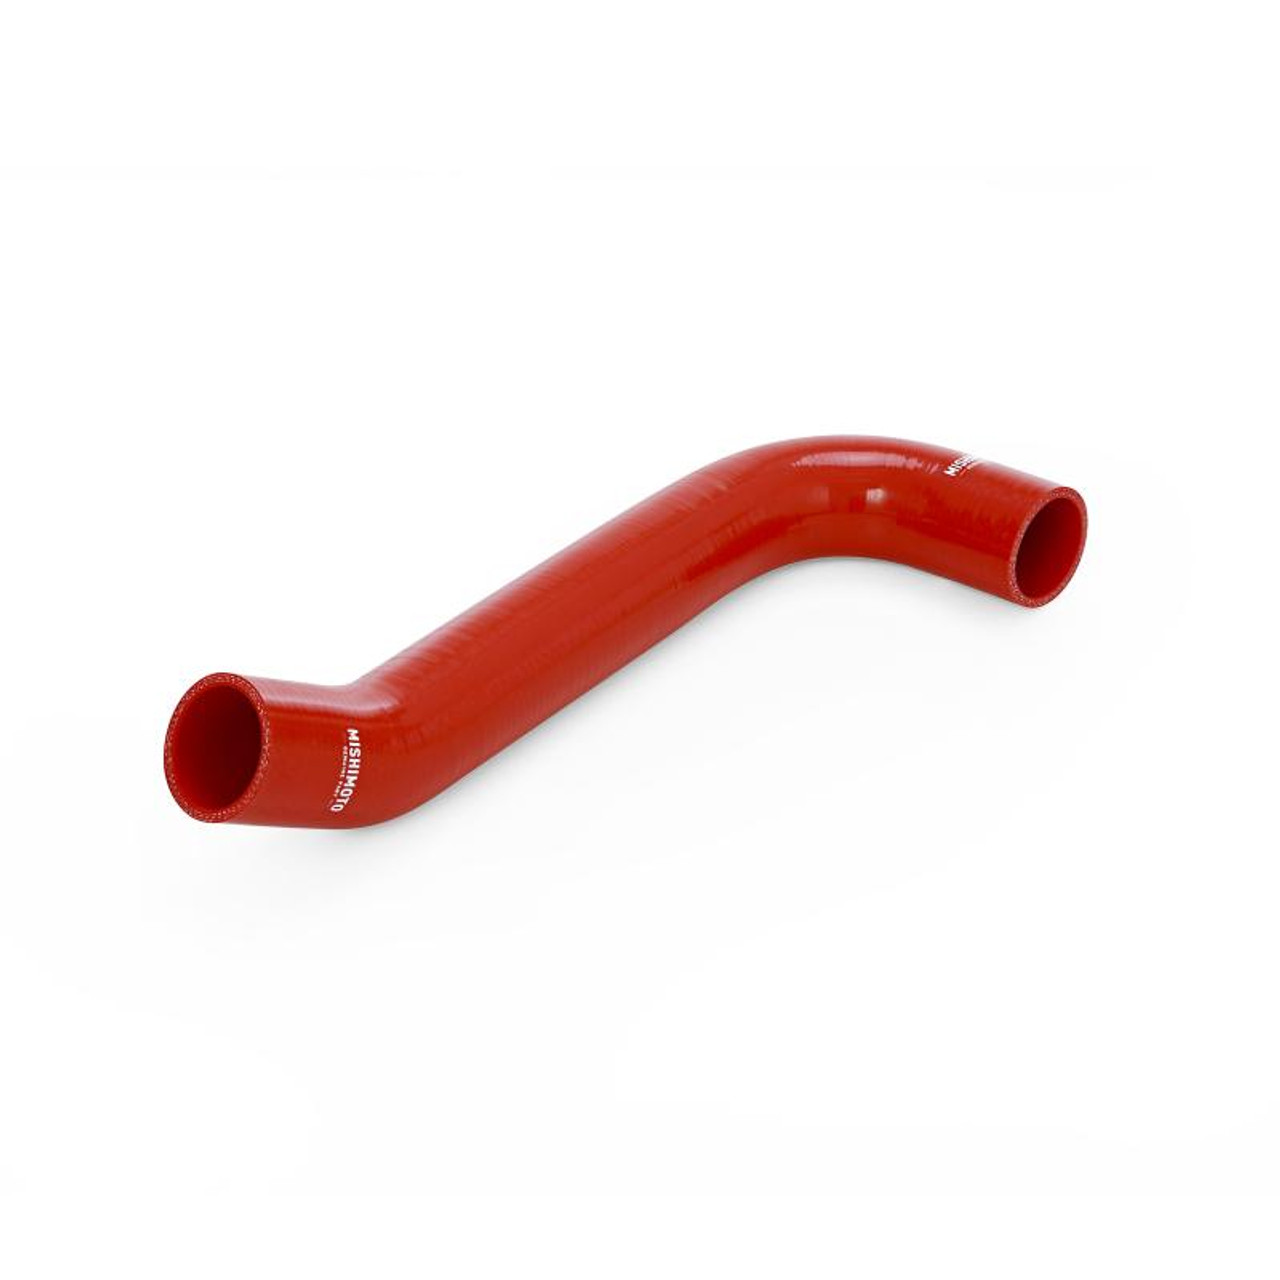 Mishimoto 2015 Dodge Challenger / Charger SRT Hellcat Silicone Radiator Hose Kit - Red - MMHOSE-MOP62-15RD